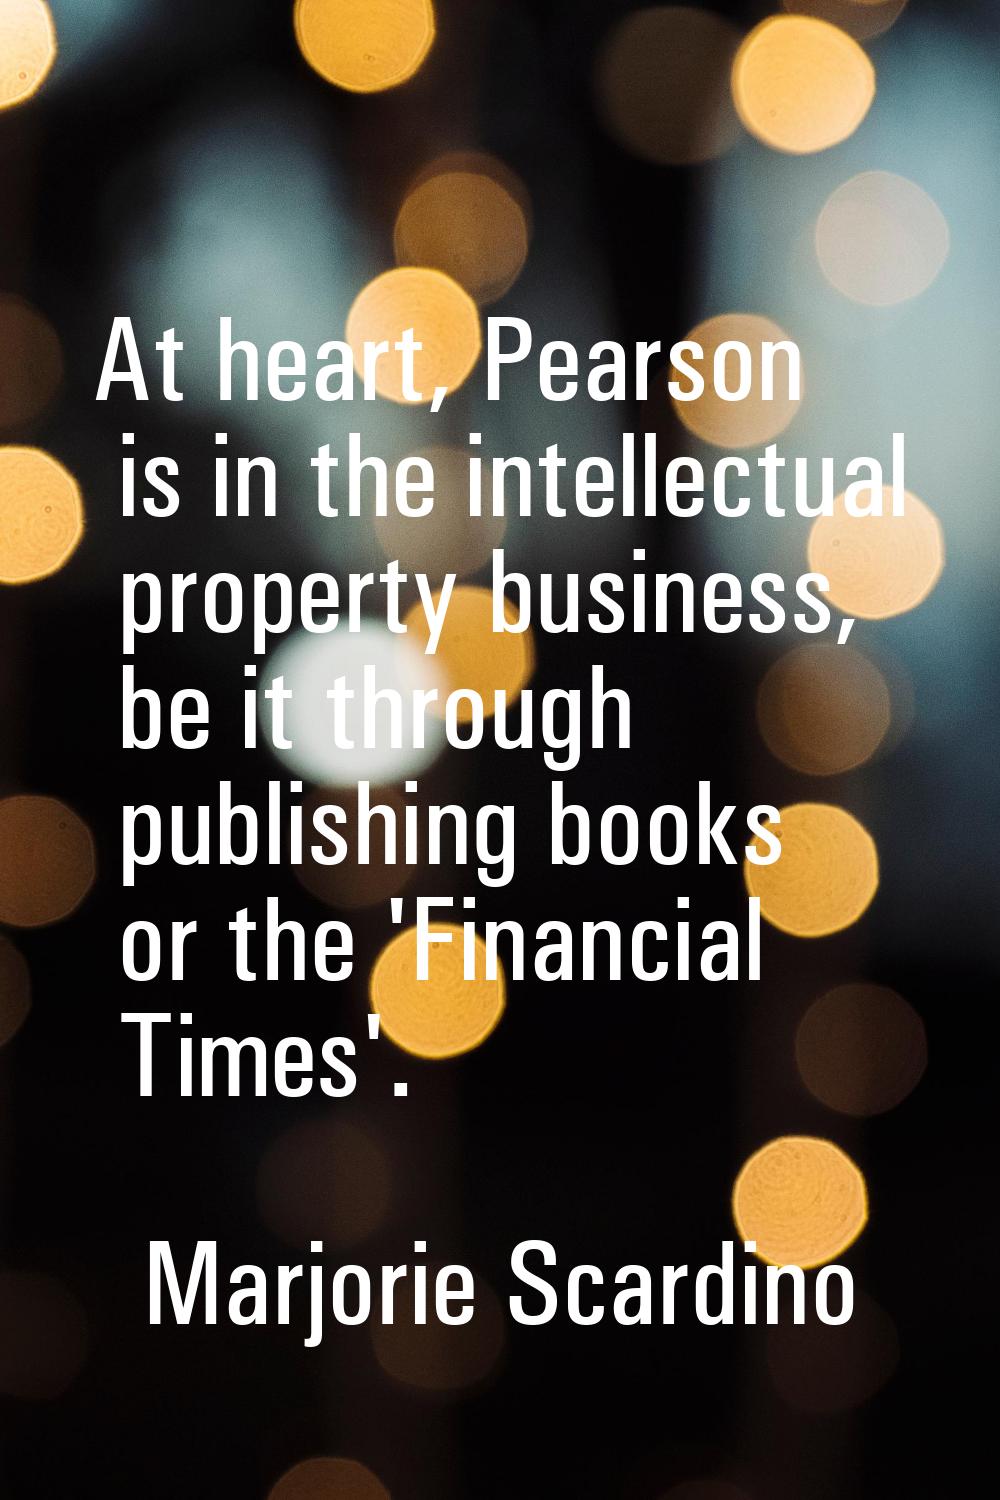 At heart, Pearson is in the intellectual property business, be it through publishing books or the '